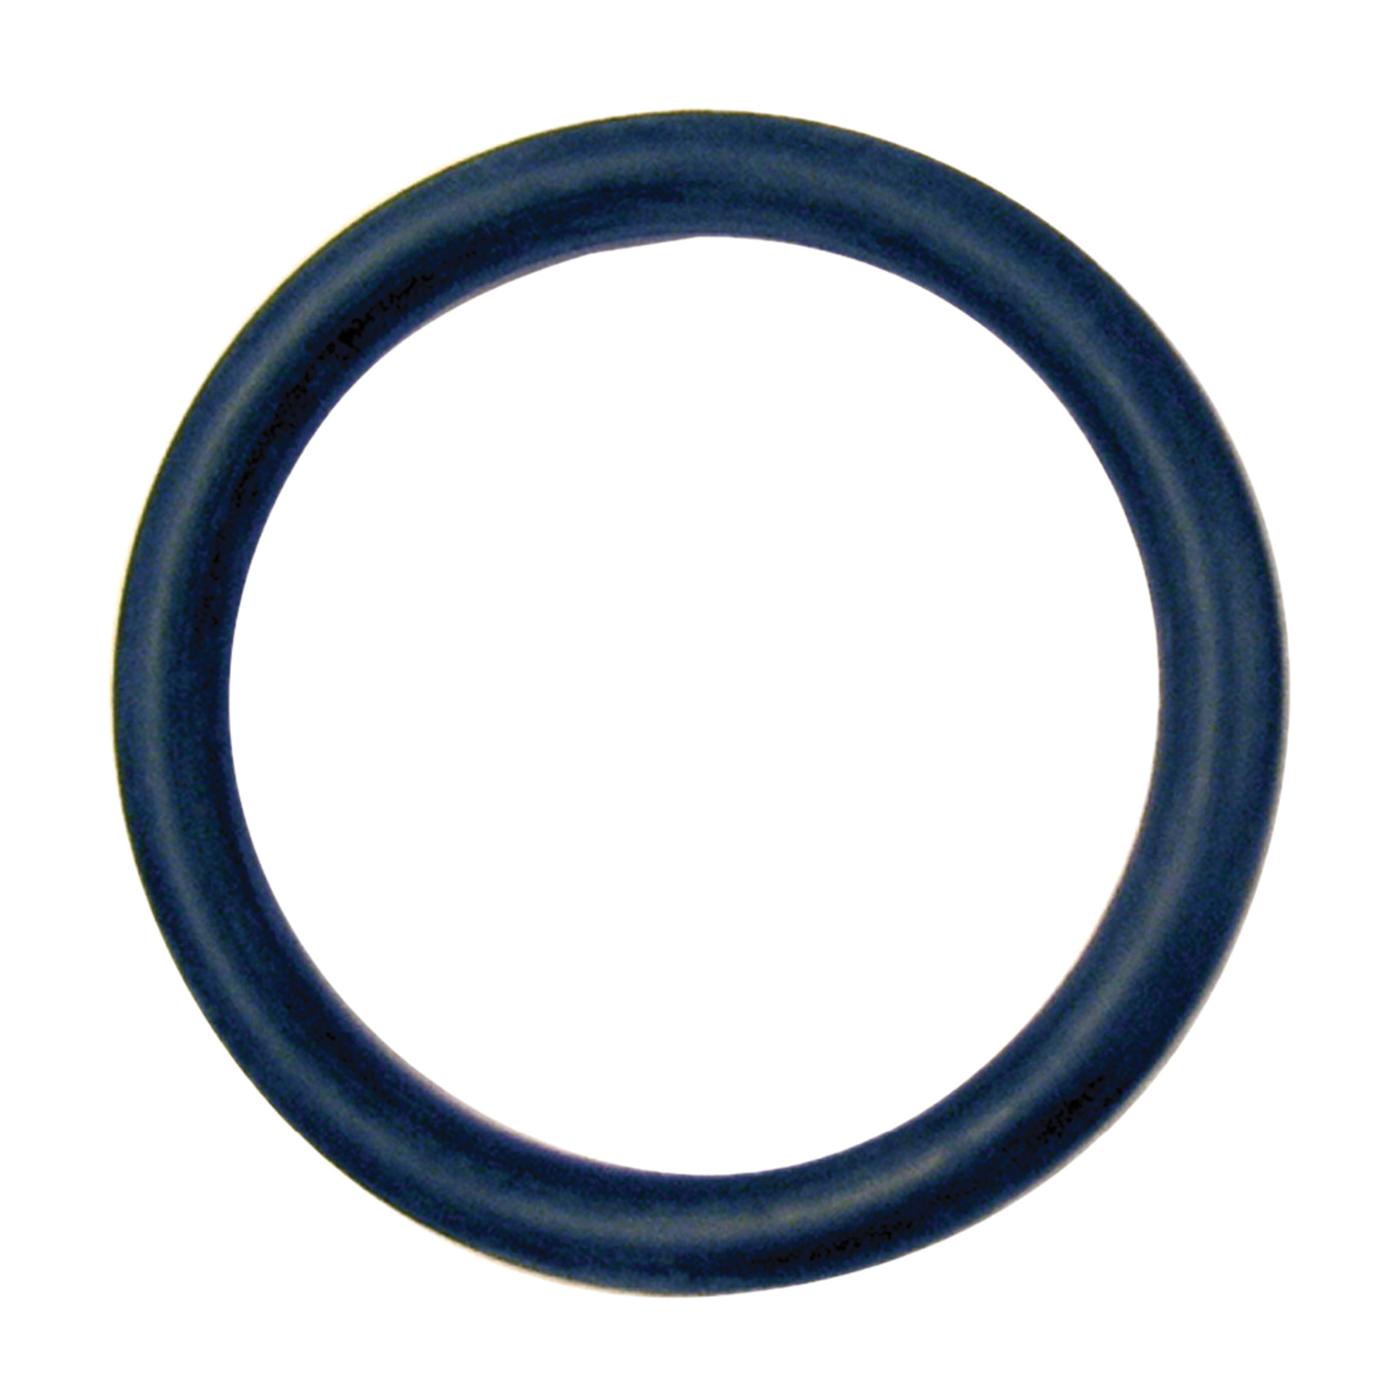 780041 Faucet O-Ring, 7/8 in ID x 1 in OD Dia, 1/16 in Thick